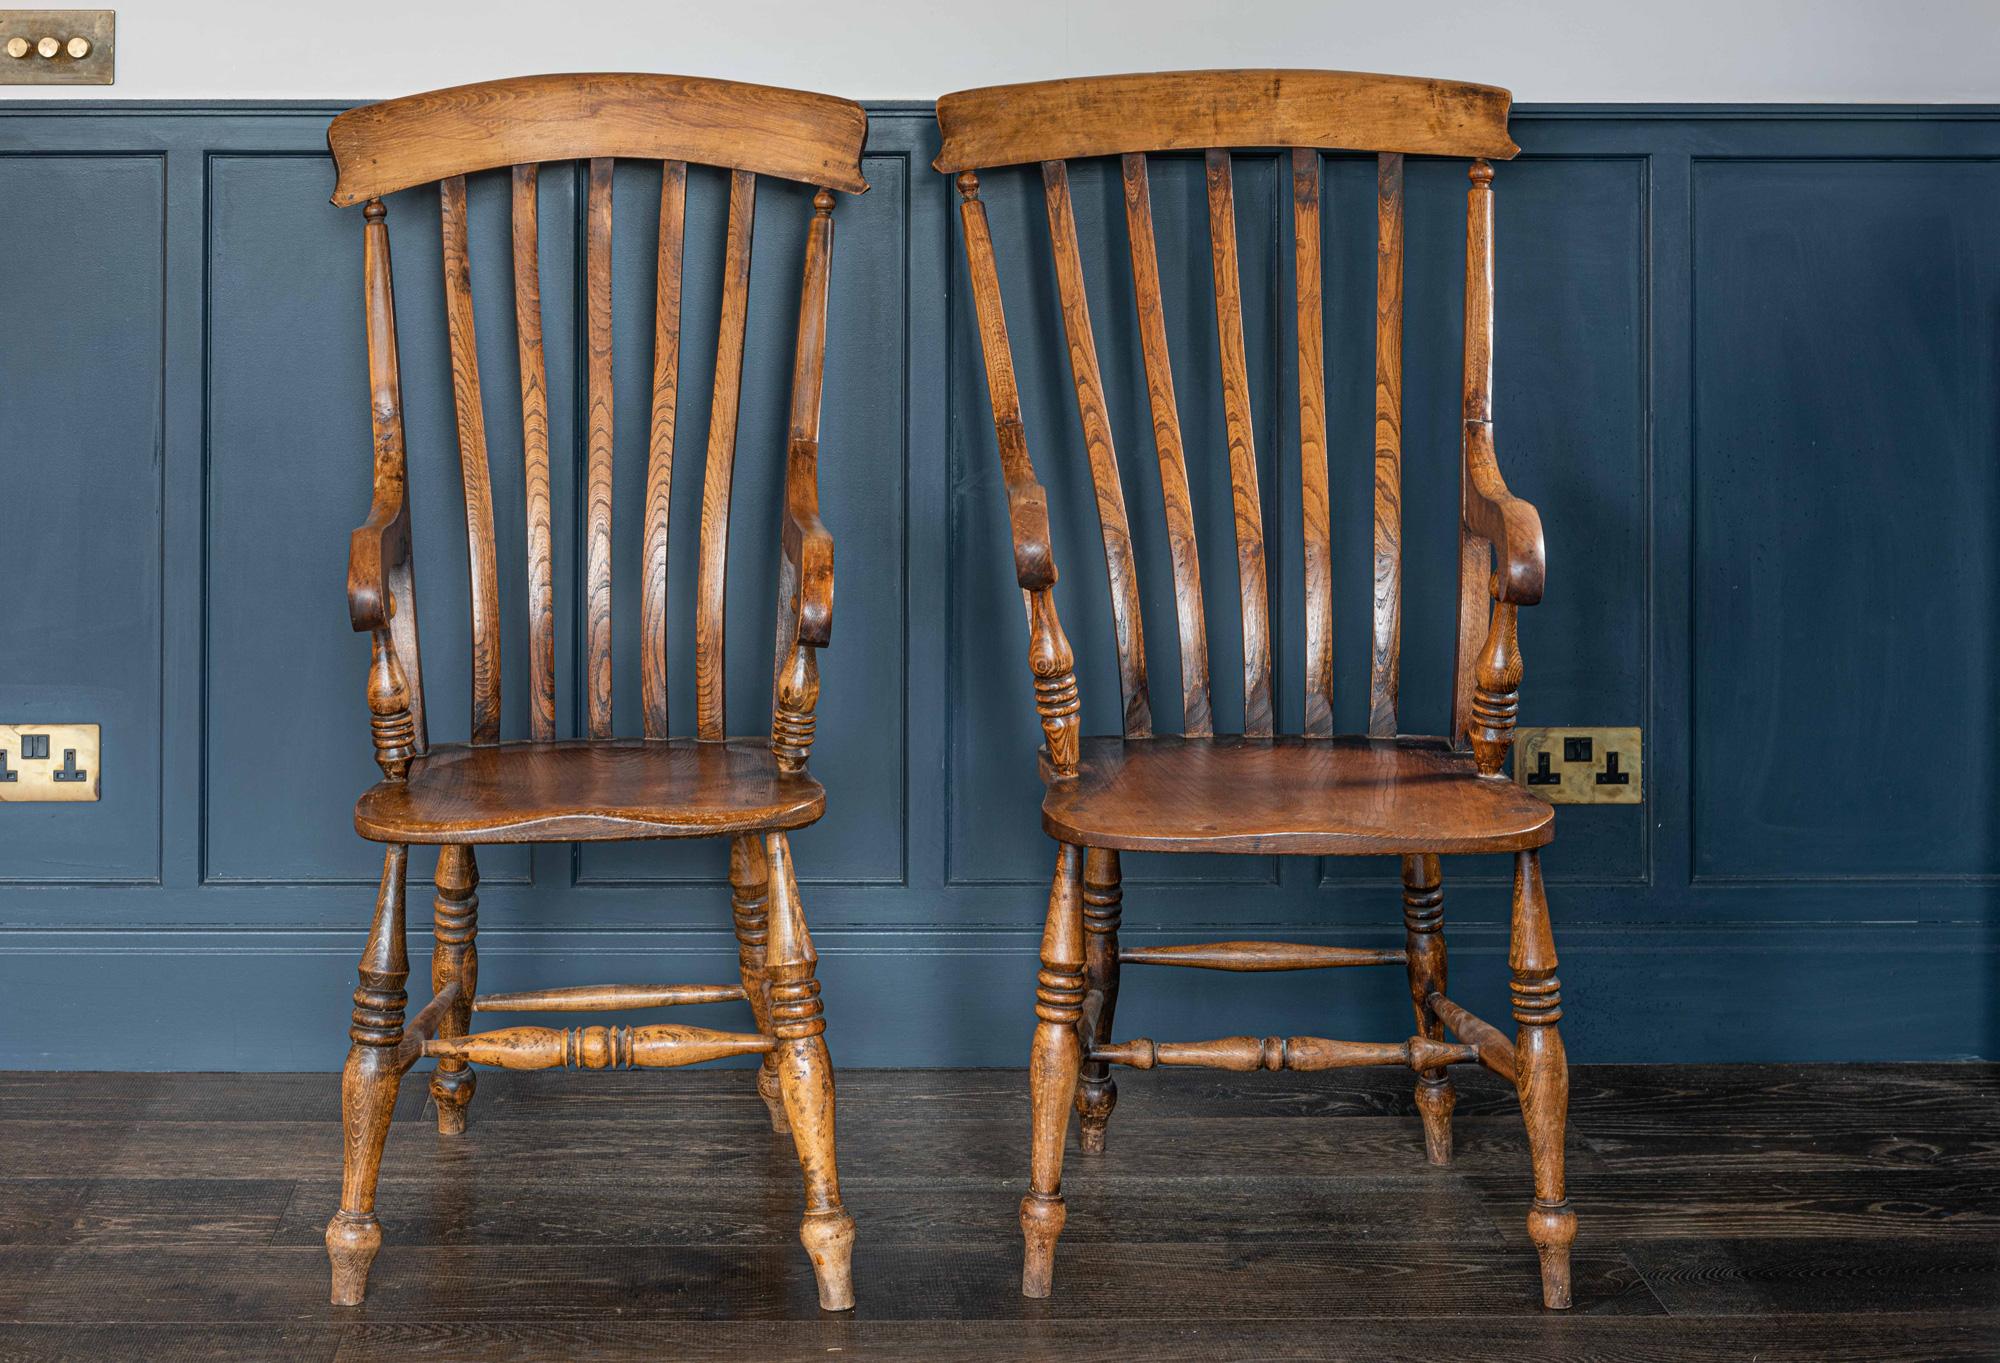 Pair of English beech and elm slat back windsor carver chairs, late 19th century
Near pair of his and hers (slightly different proportions & design) good original wear and rich color. Signs of historical repairs.

Price is for the